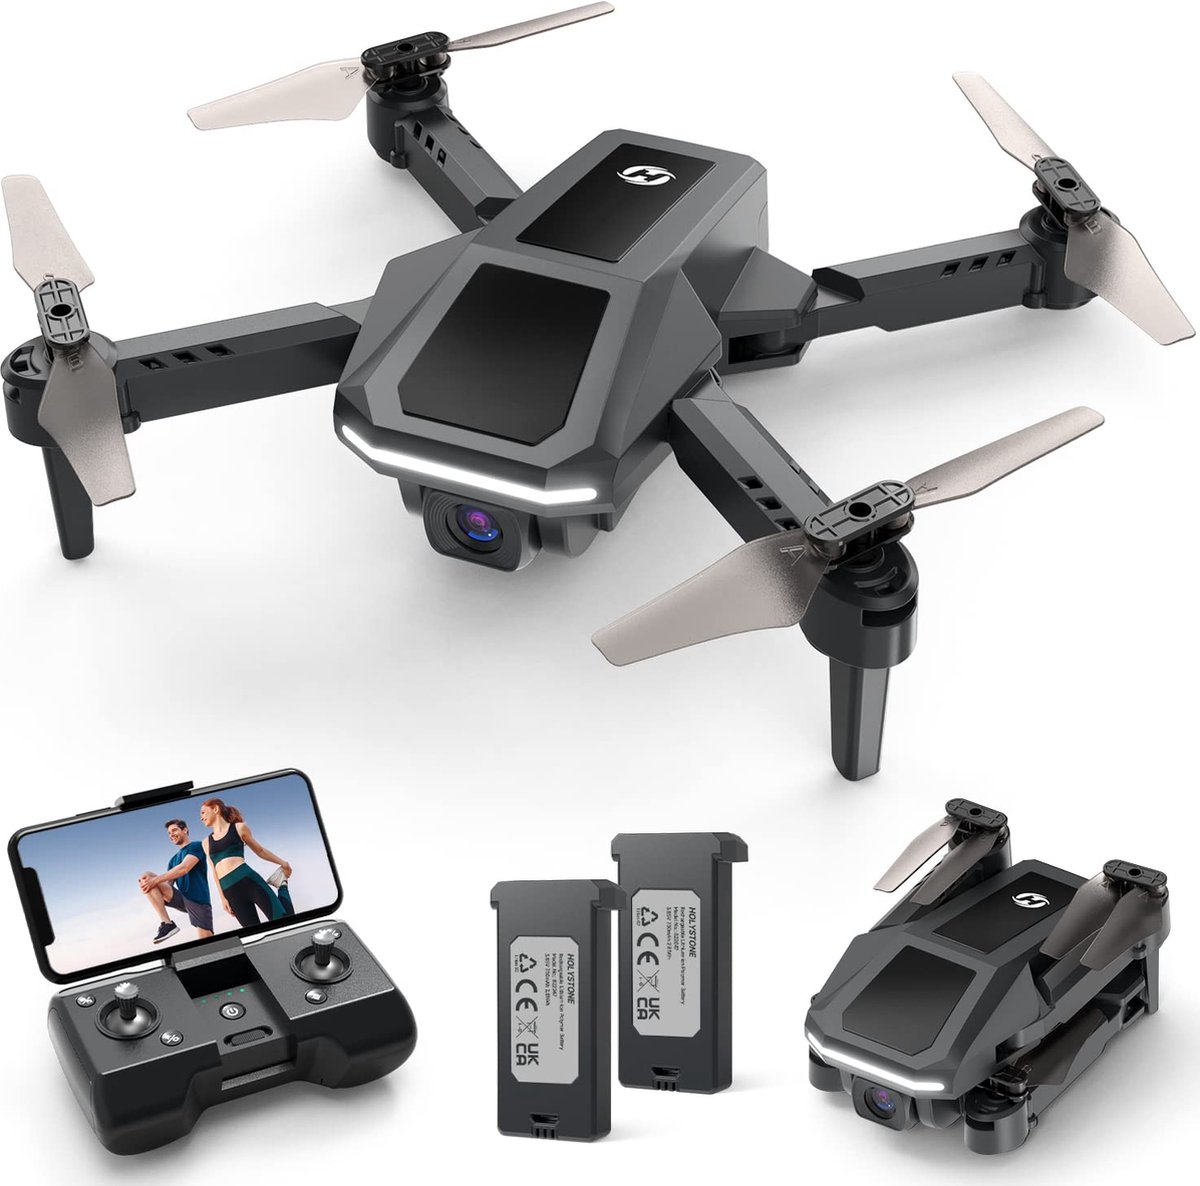 Holy Stone HS430 Drone Zwart - Drone met Camera - Stabiele Drone - Quadcopter - Full HD - Gratis extra Accu en extra Propellers - Throw to Go - 3D Flip - Kantelbesturing Smartphone